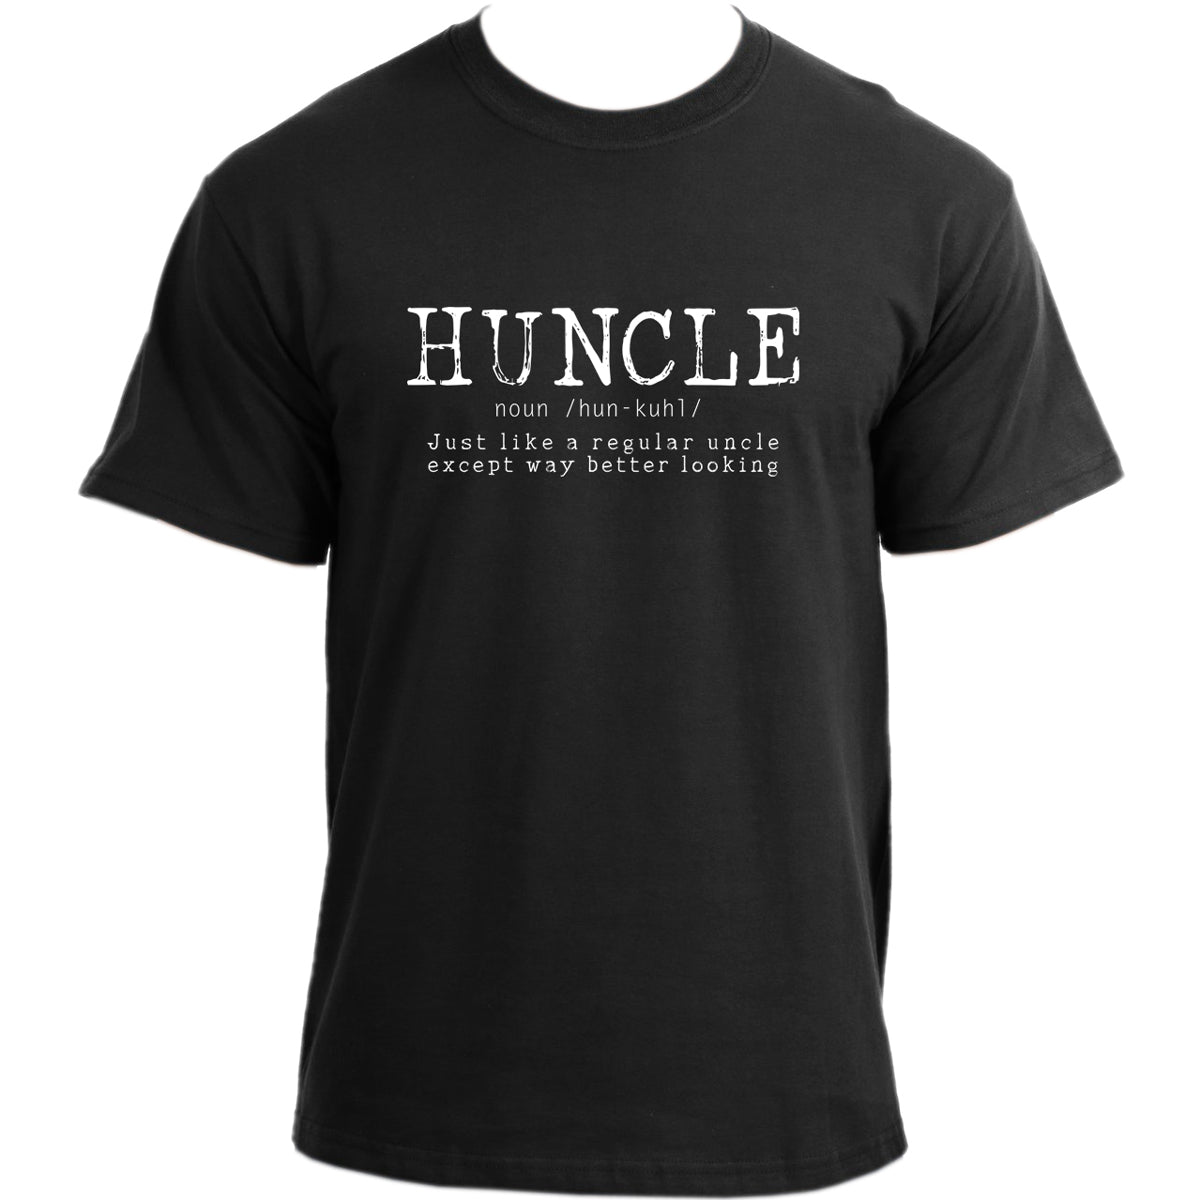 Huncle T Shirt, Novelty Humor Cool Very Funny Uncle Tshirt, Uncle Definition T-Shirt